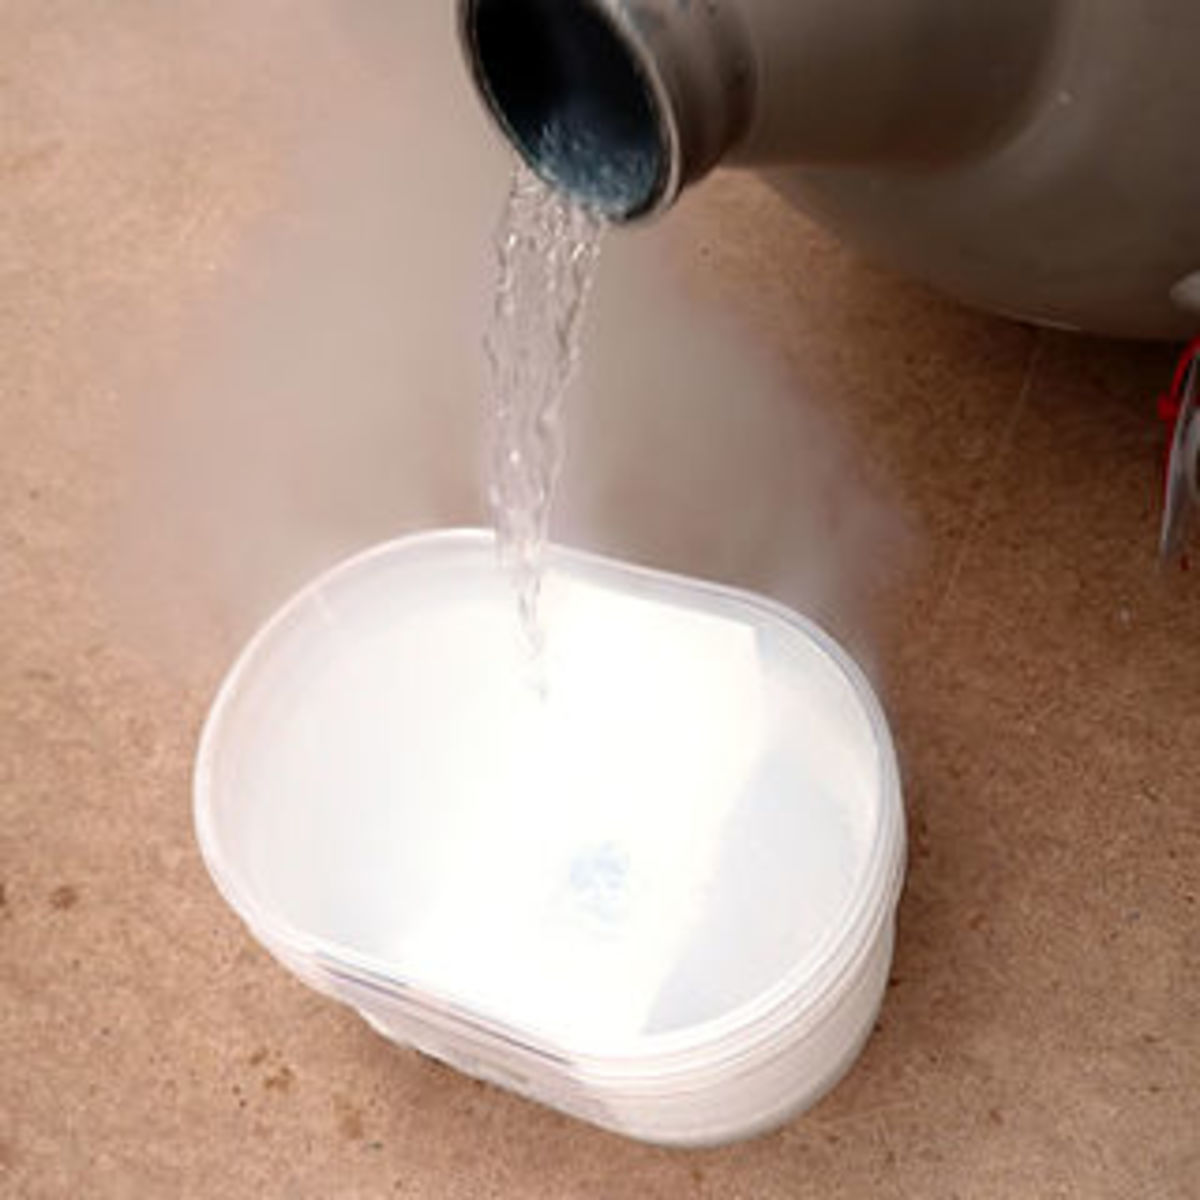 Liquid nitrogen is a quick and effective method for removing brown spots. 